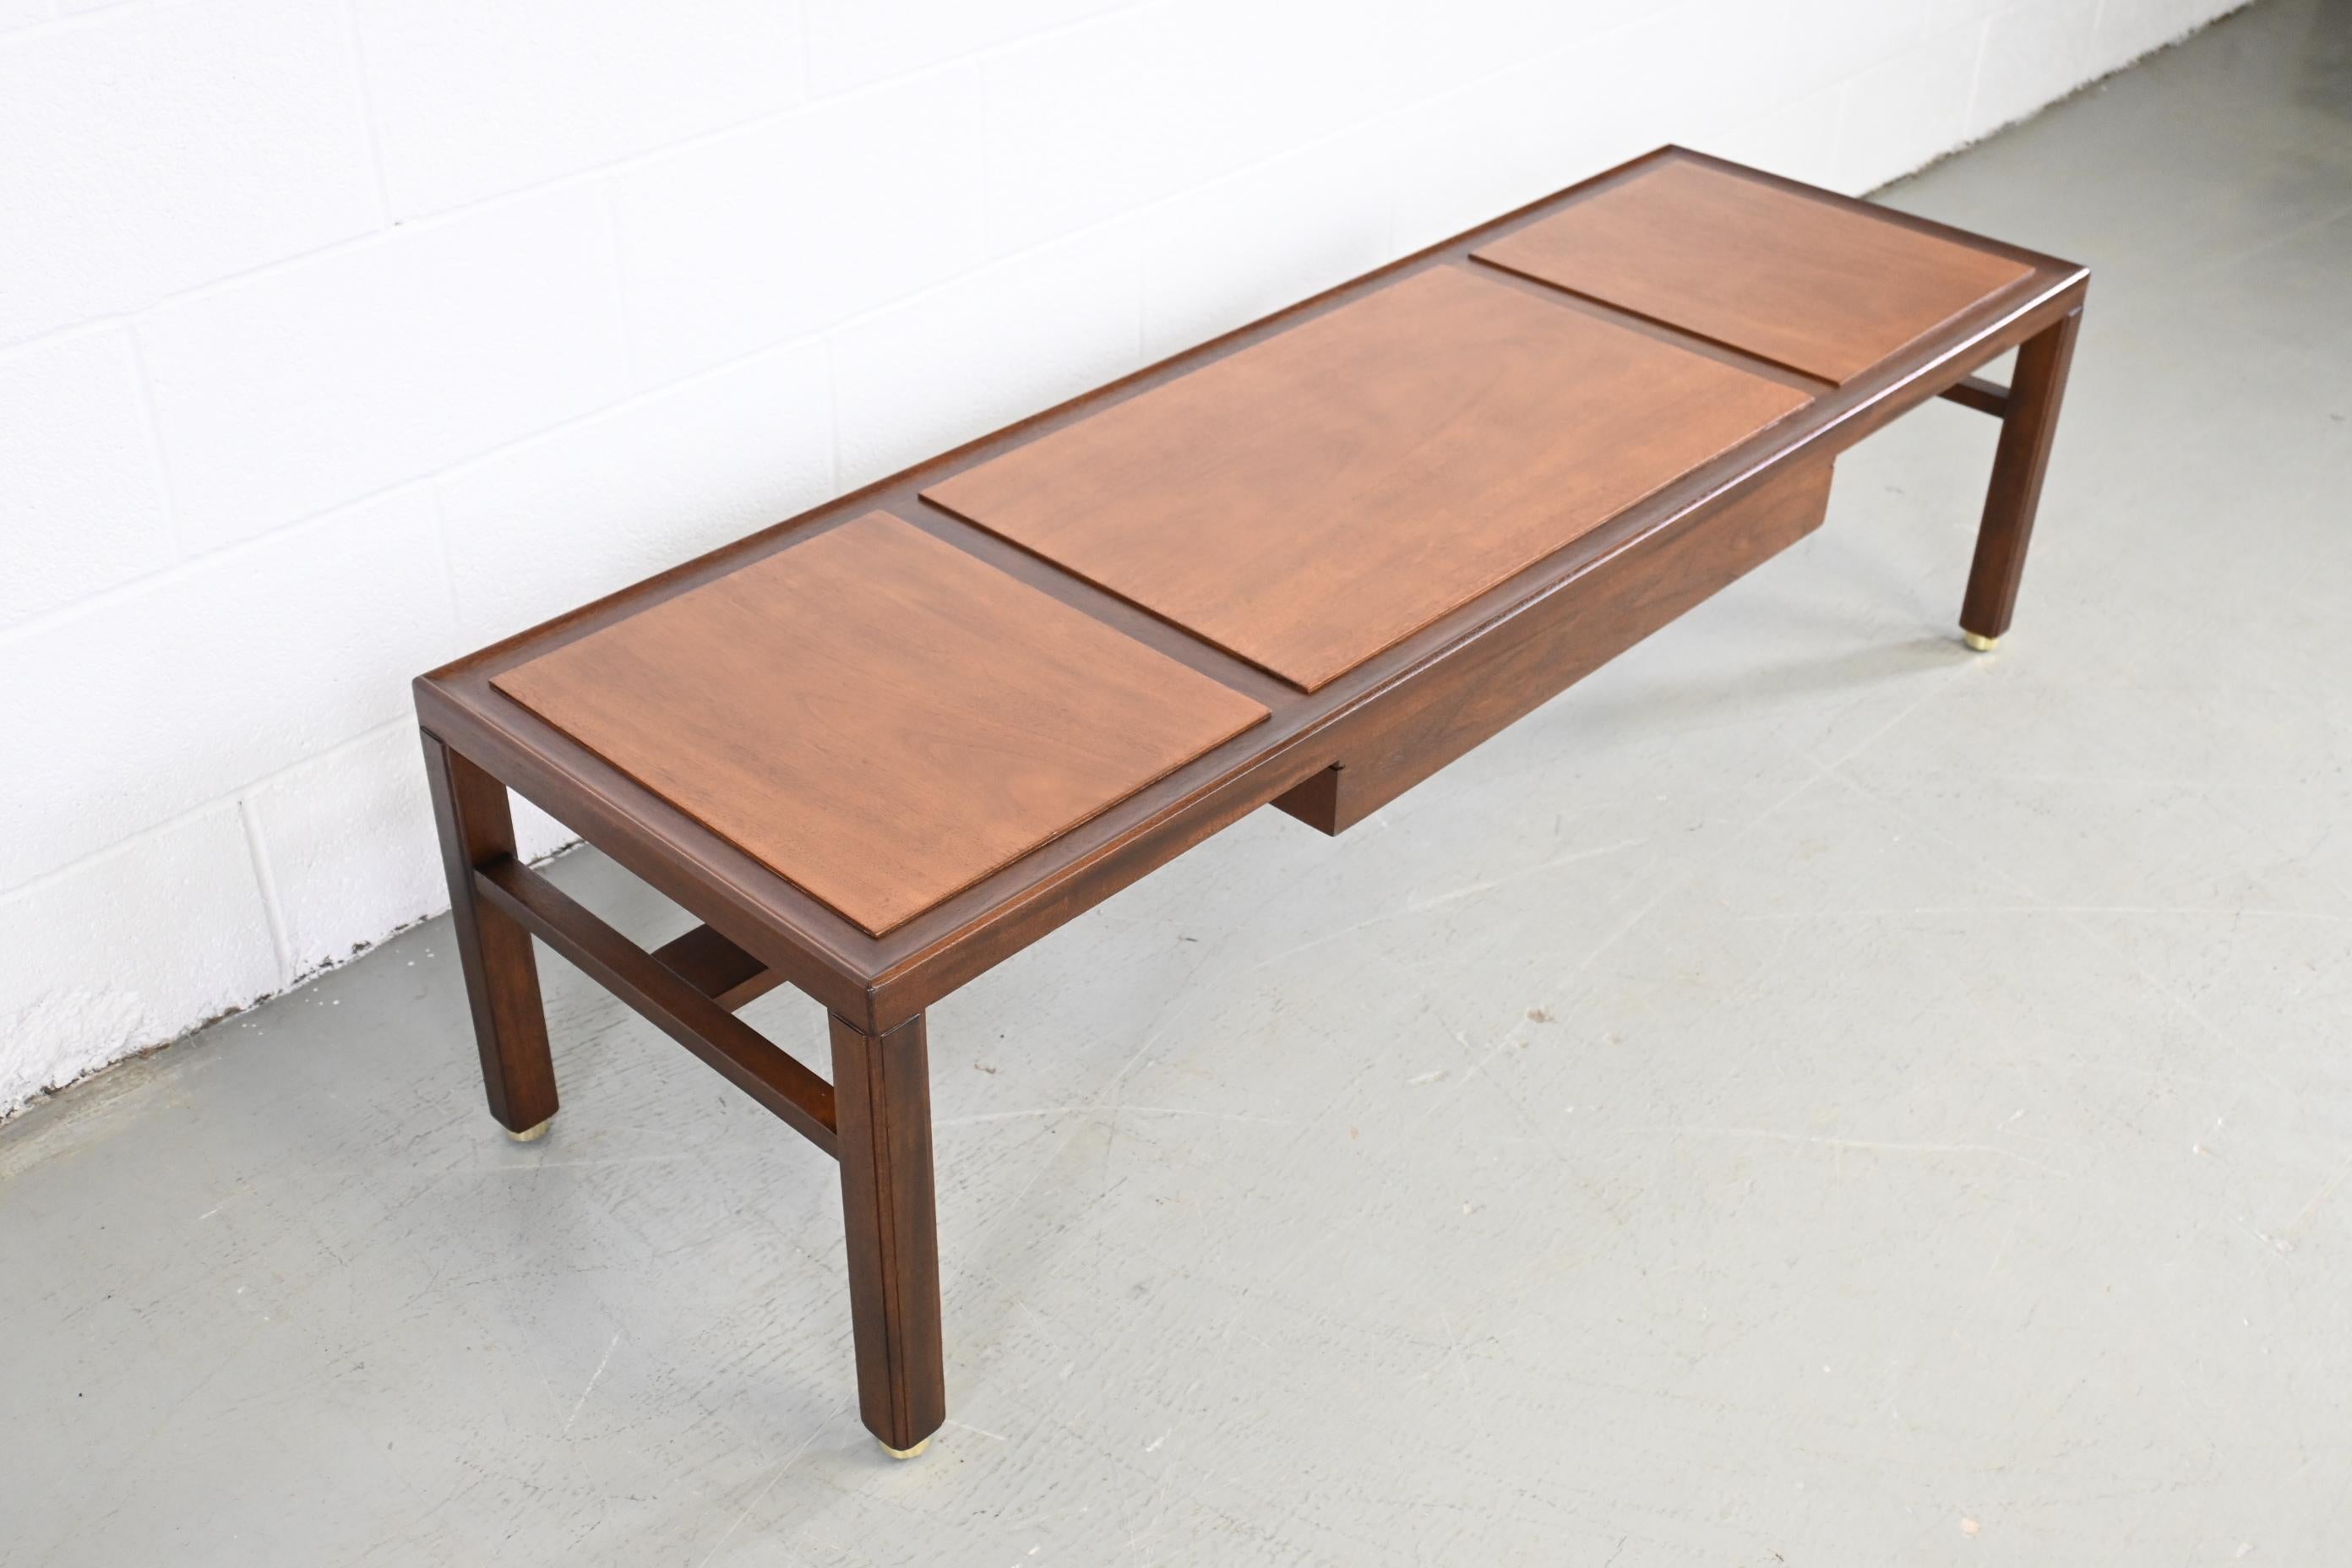 Dunbar Furniture Mid-Centiry Modern two toned coffee or cocktail table

Dunbar Furniture, USA, 1950s

60 Wide x 19 Deep x 16.5 High.

Mid-Century Modern mahogany coffee or cocktail table with bleached mahogany inserts and single